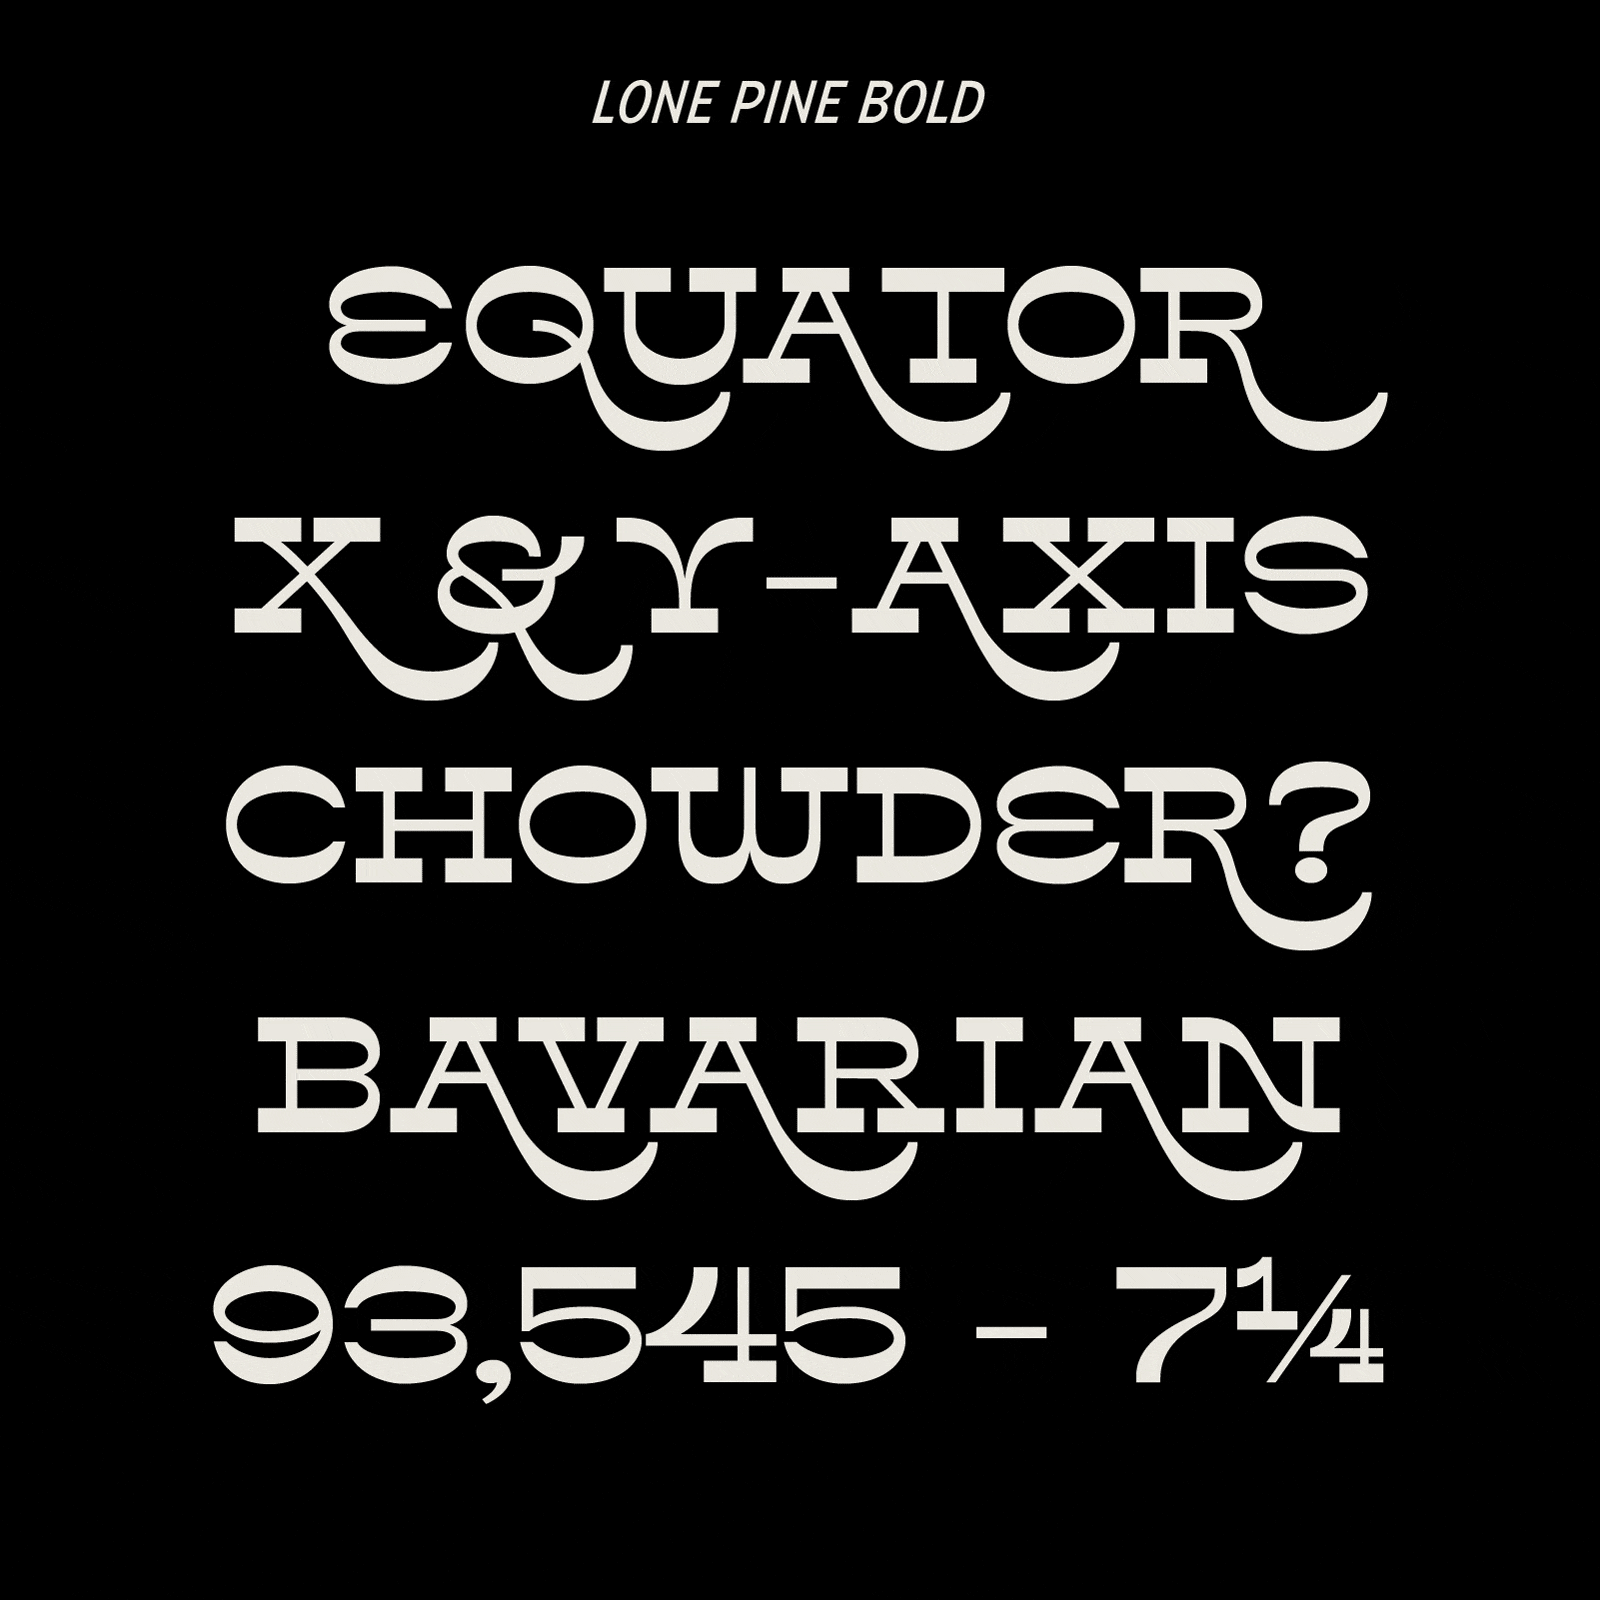 typeset examples of Lone Pine Bold